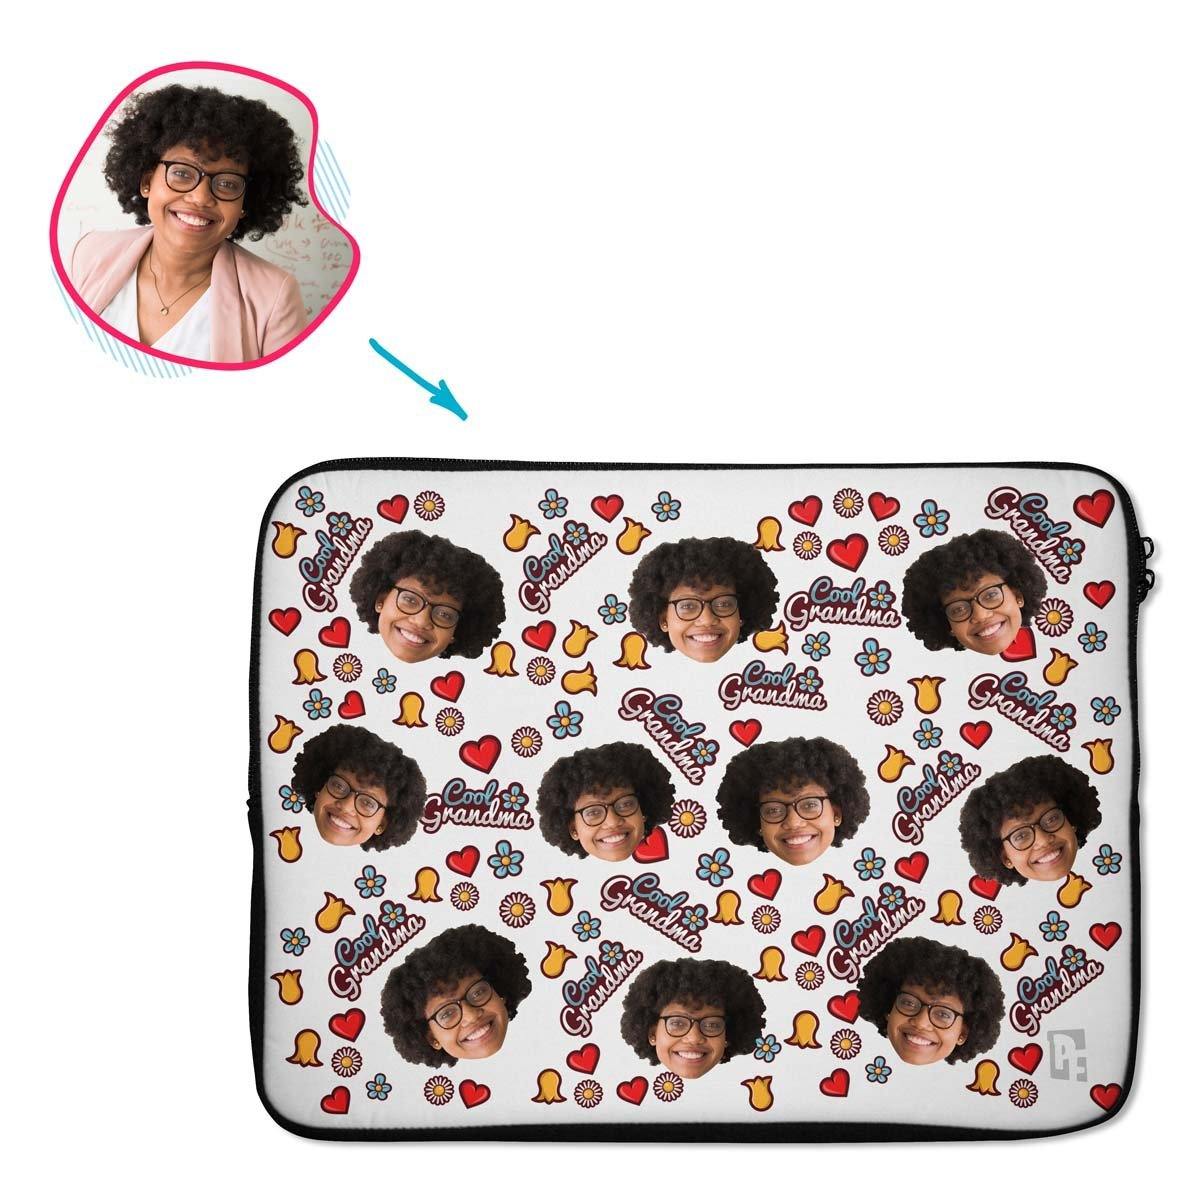 white Cool Grandmother laptop sleeve personalized with photo of face printed on them